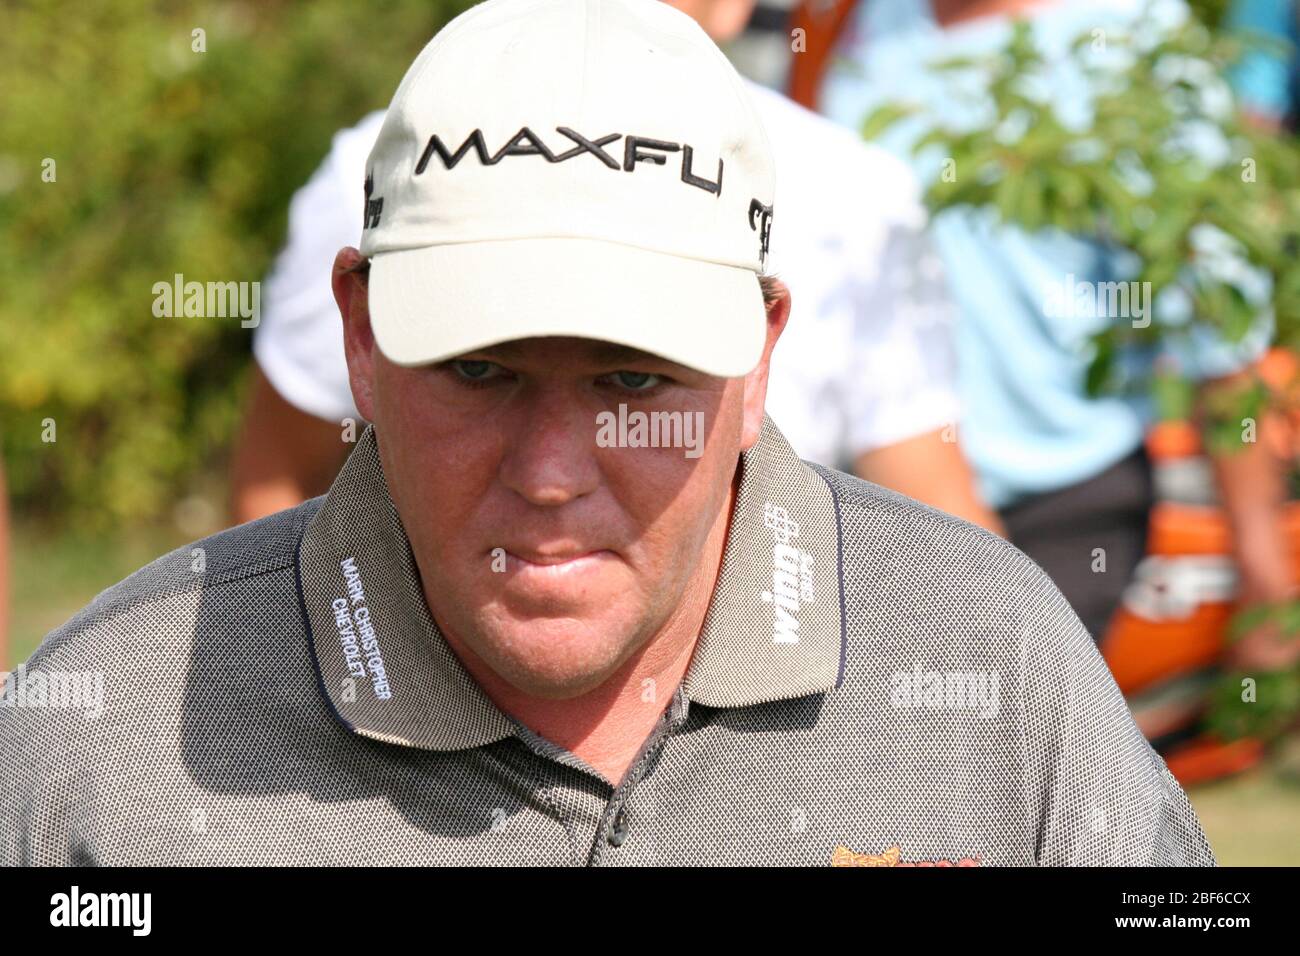 The Legendary PGA Tour player John Daly playing golf in Stockholm / Sweden, Arlandastad, golf course, august 2007. Stock Photo